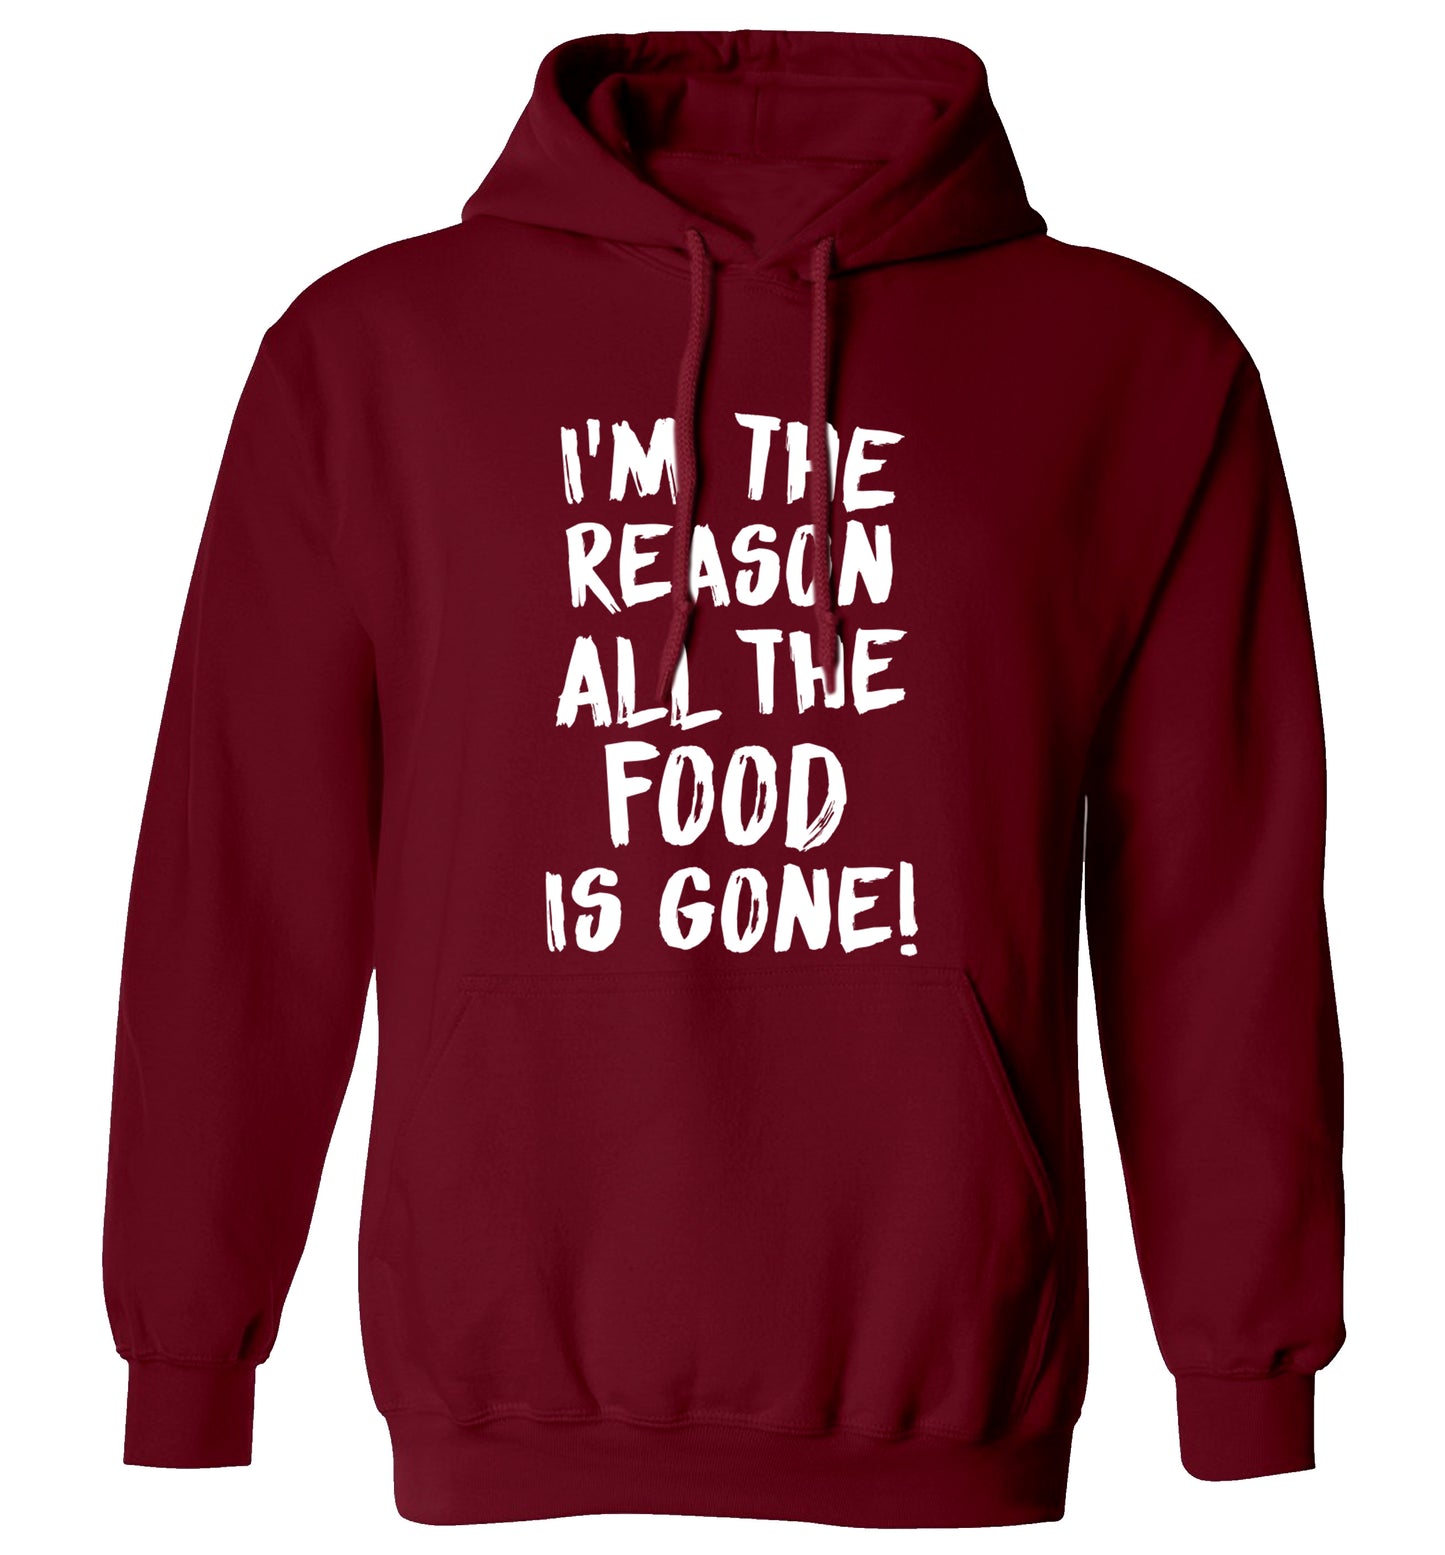 I'm the reason why all the food is gone adults unisex maroon hoodie 2XL